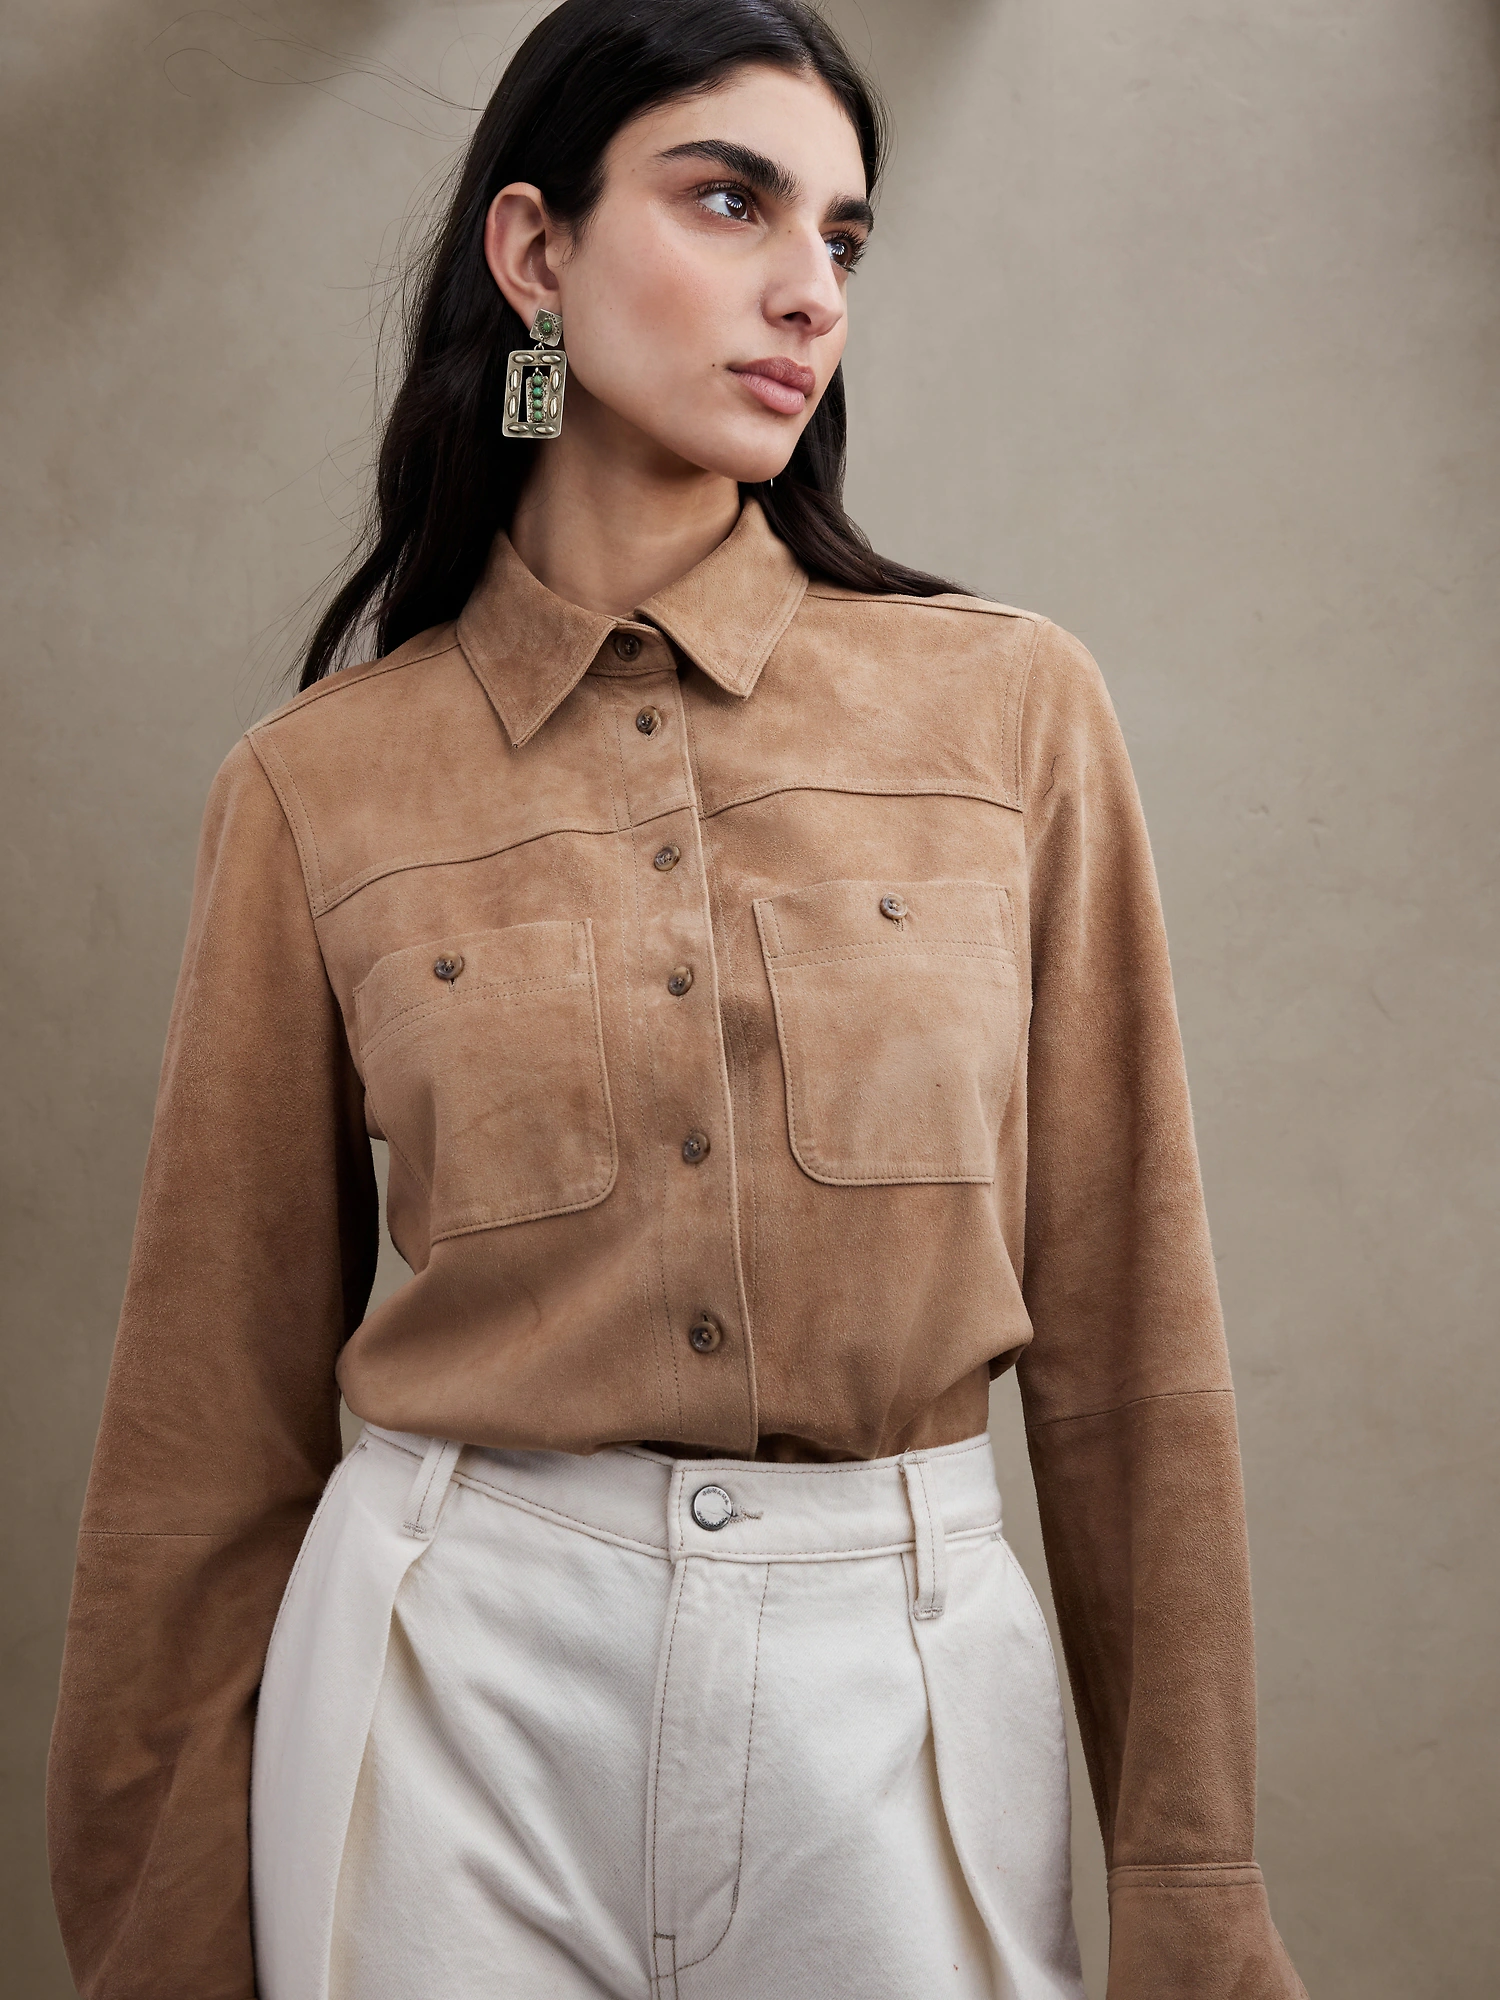 Suede Shirt Outfit Ideas for
  Women